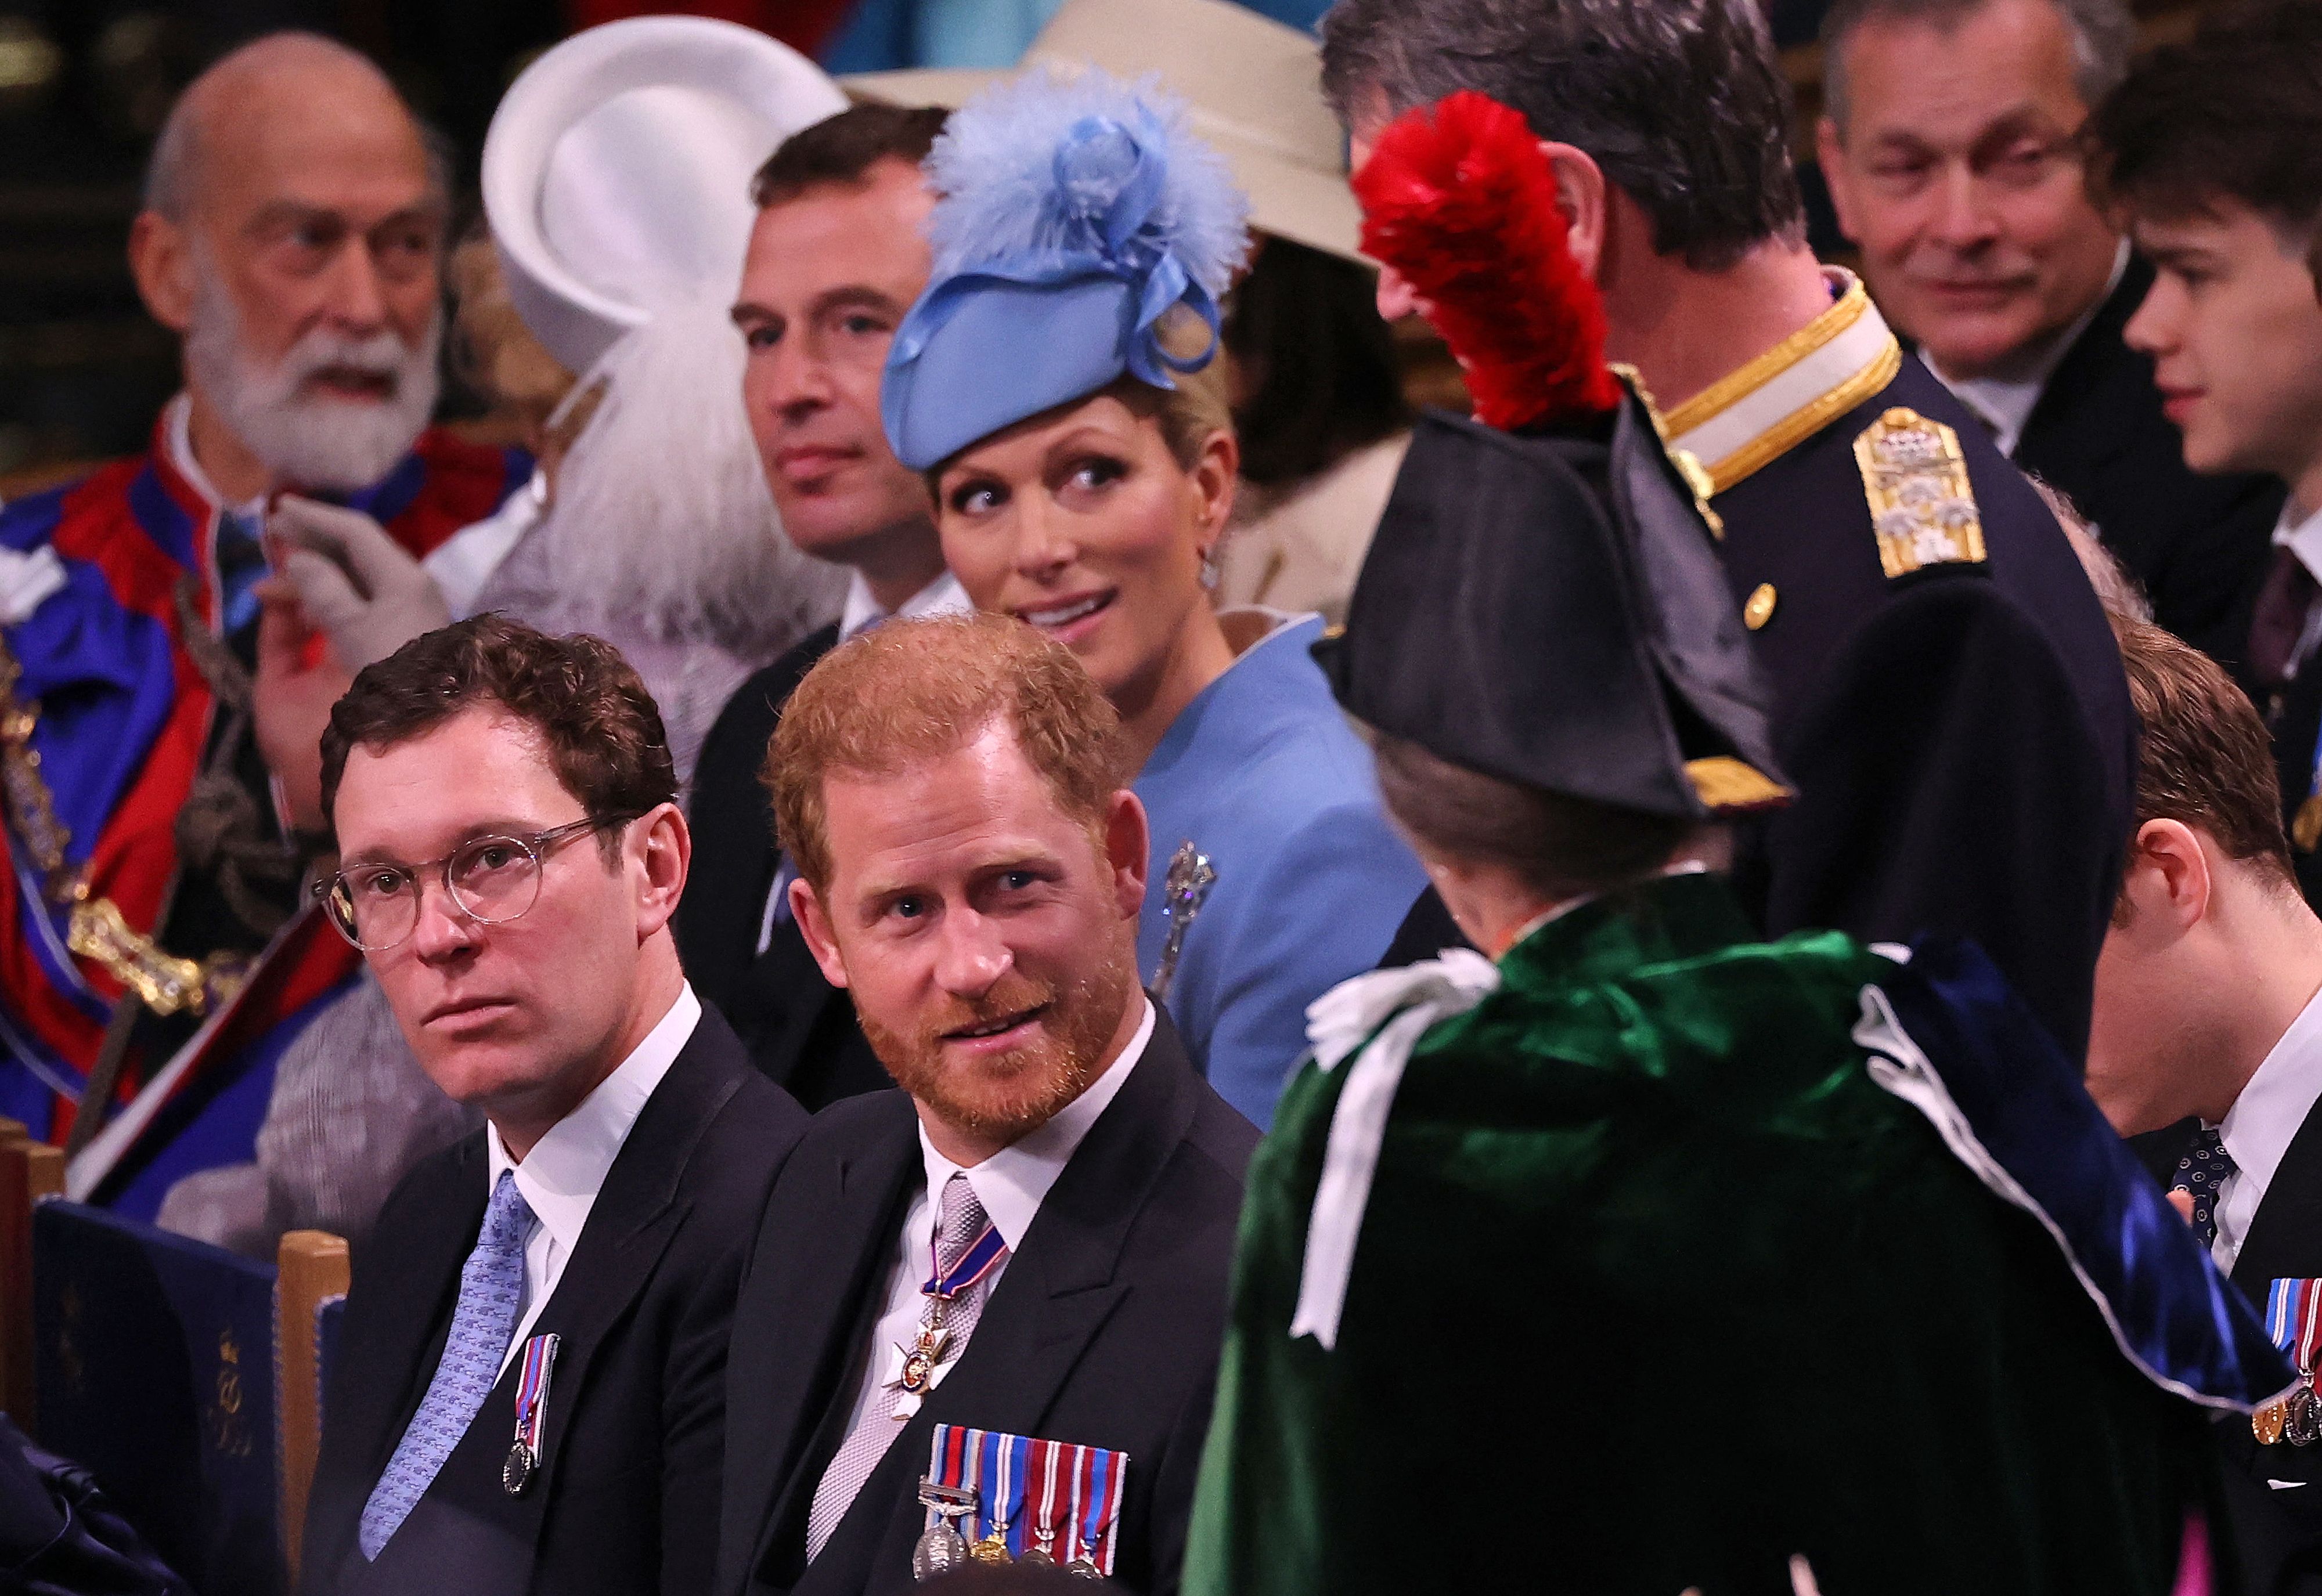 Prince Harry is expected to leave for America immediately after the coronation ceremony